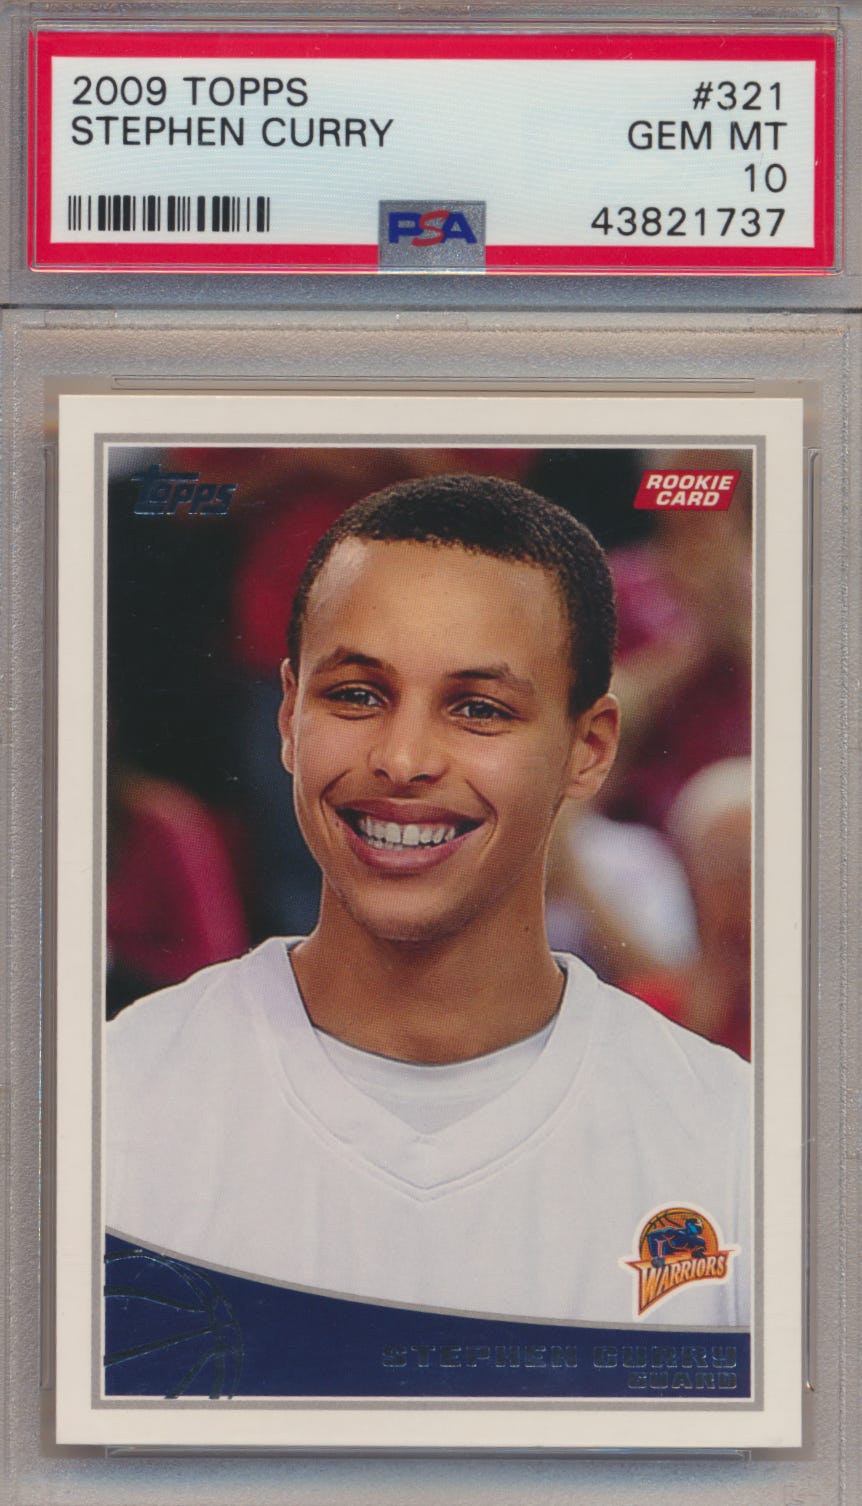 Image 1 - STEPHEN-CURRY-2009-10-TOPPS-ROOKIE-WARRIORS-321-PSA-10